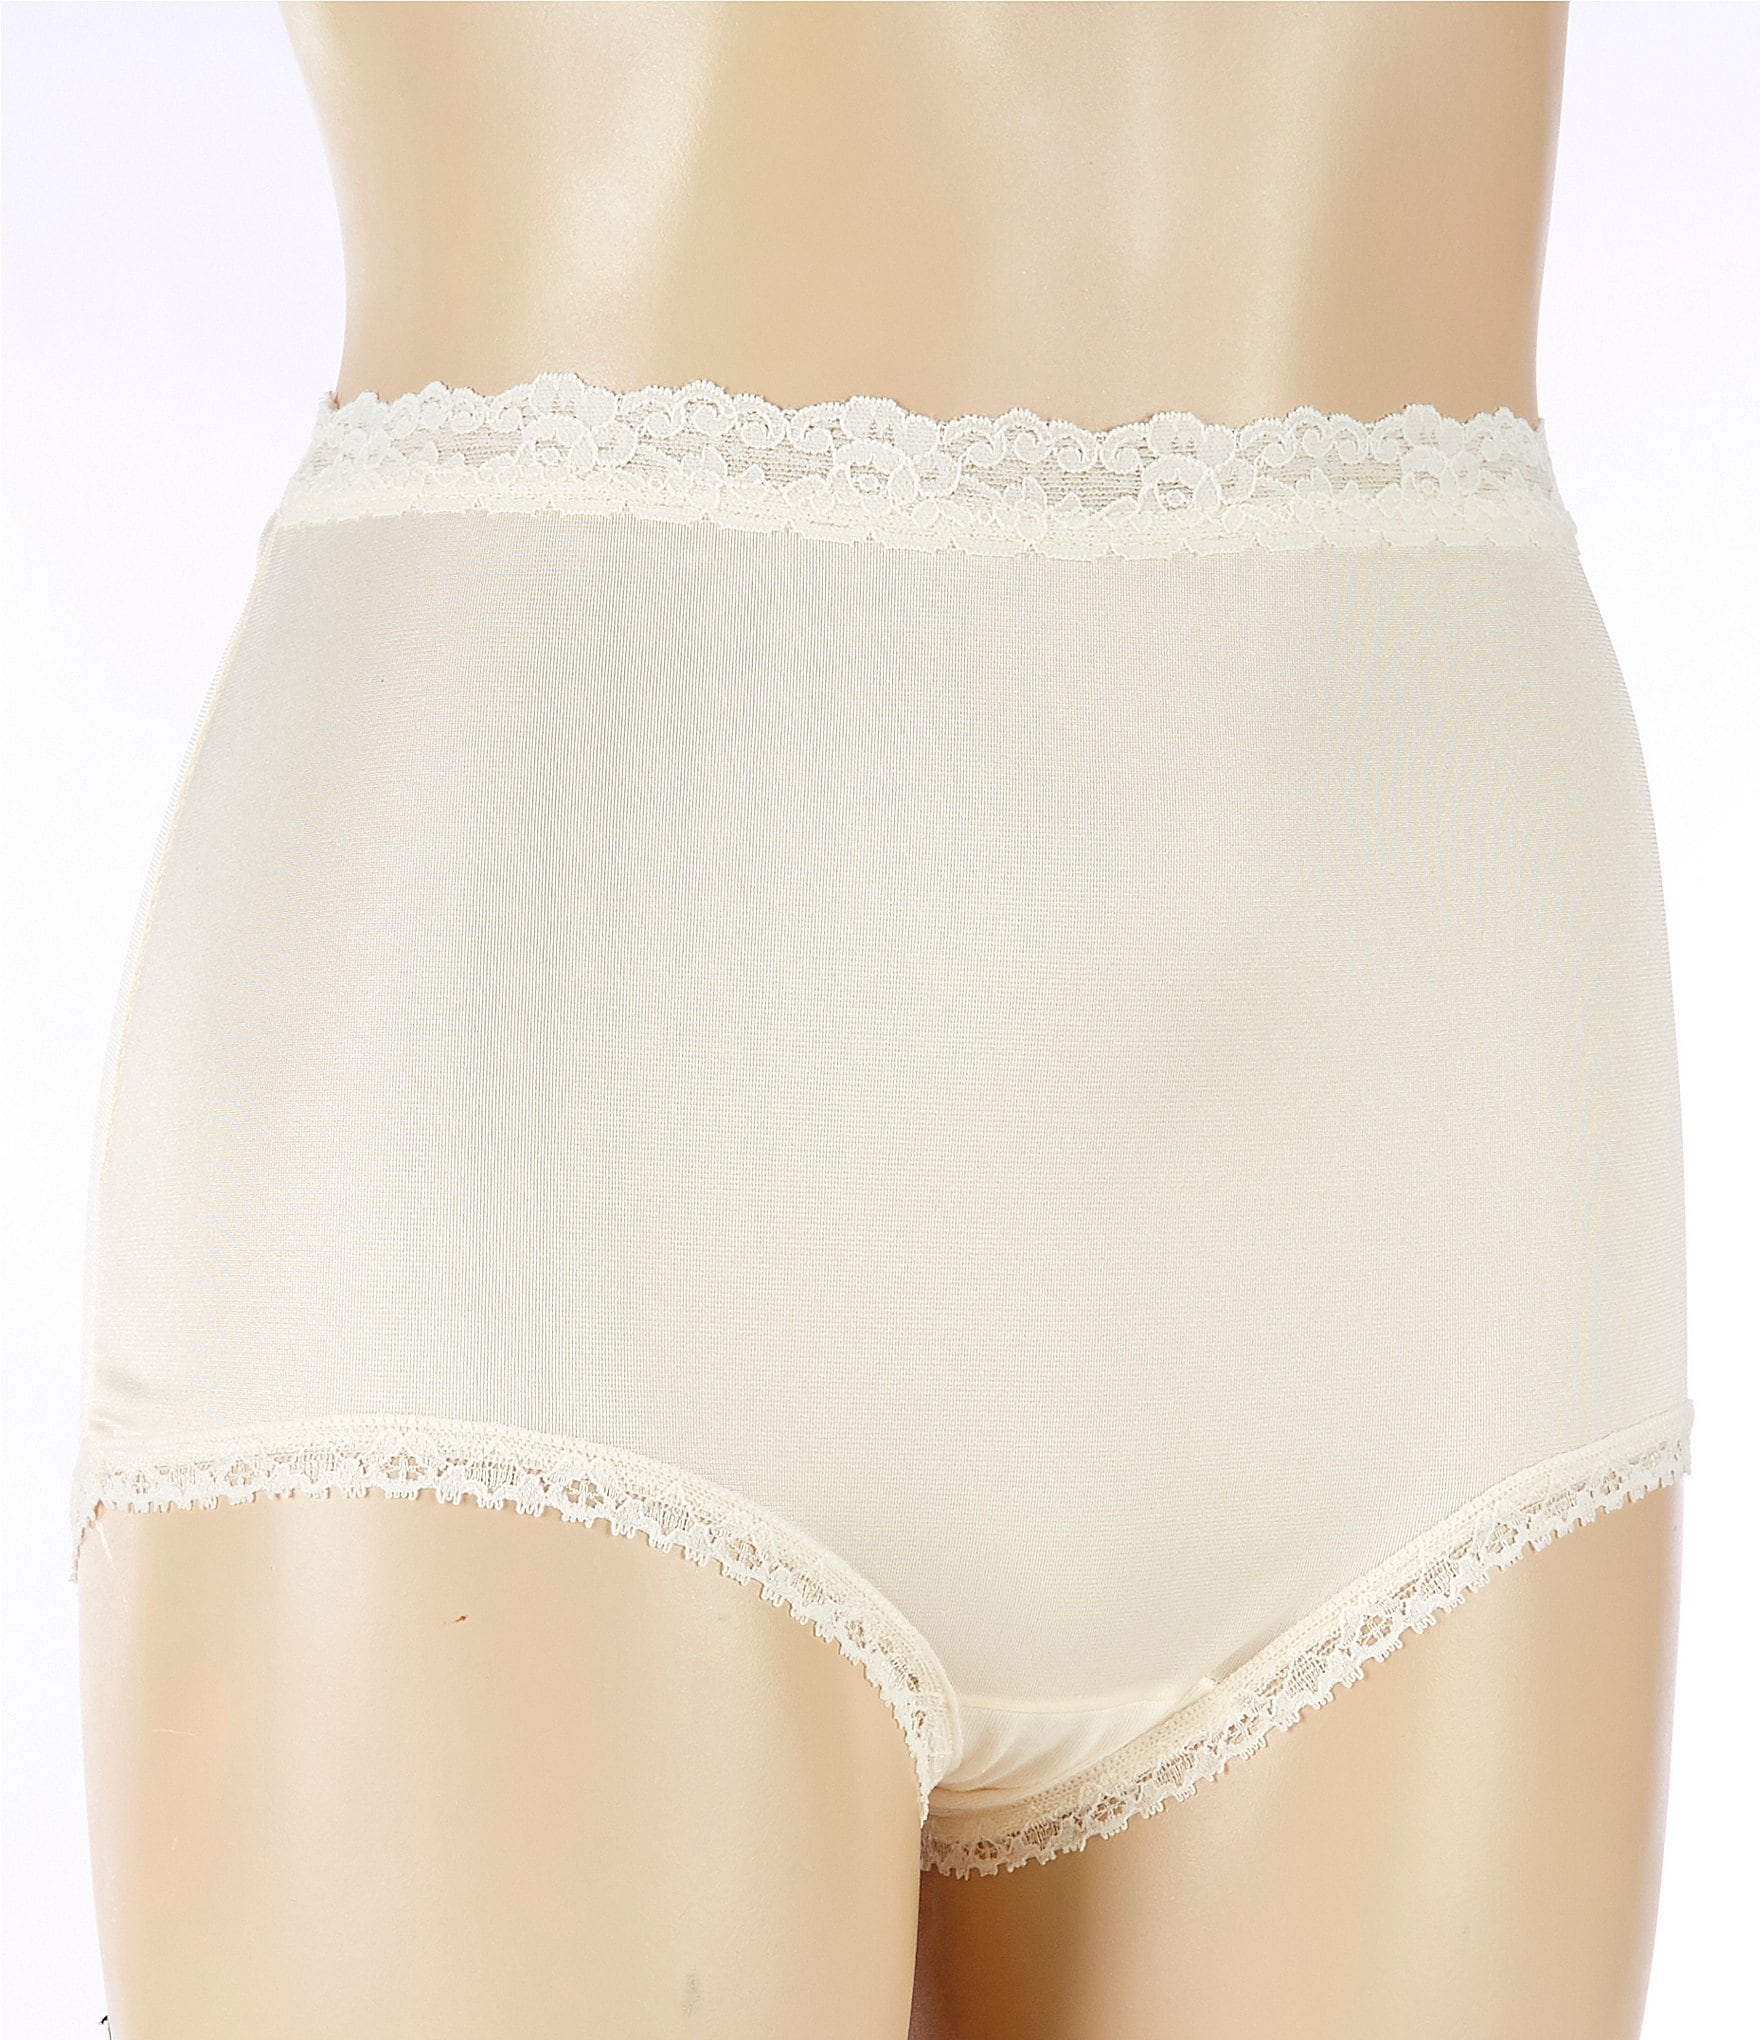 $6/mo - Finance Vanity Fair Women's Perfectly Yours High Waisted Brief  Panties